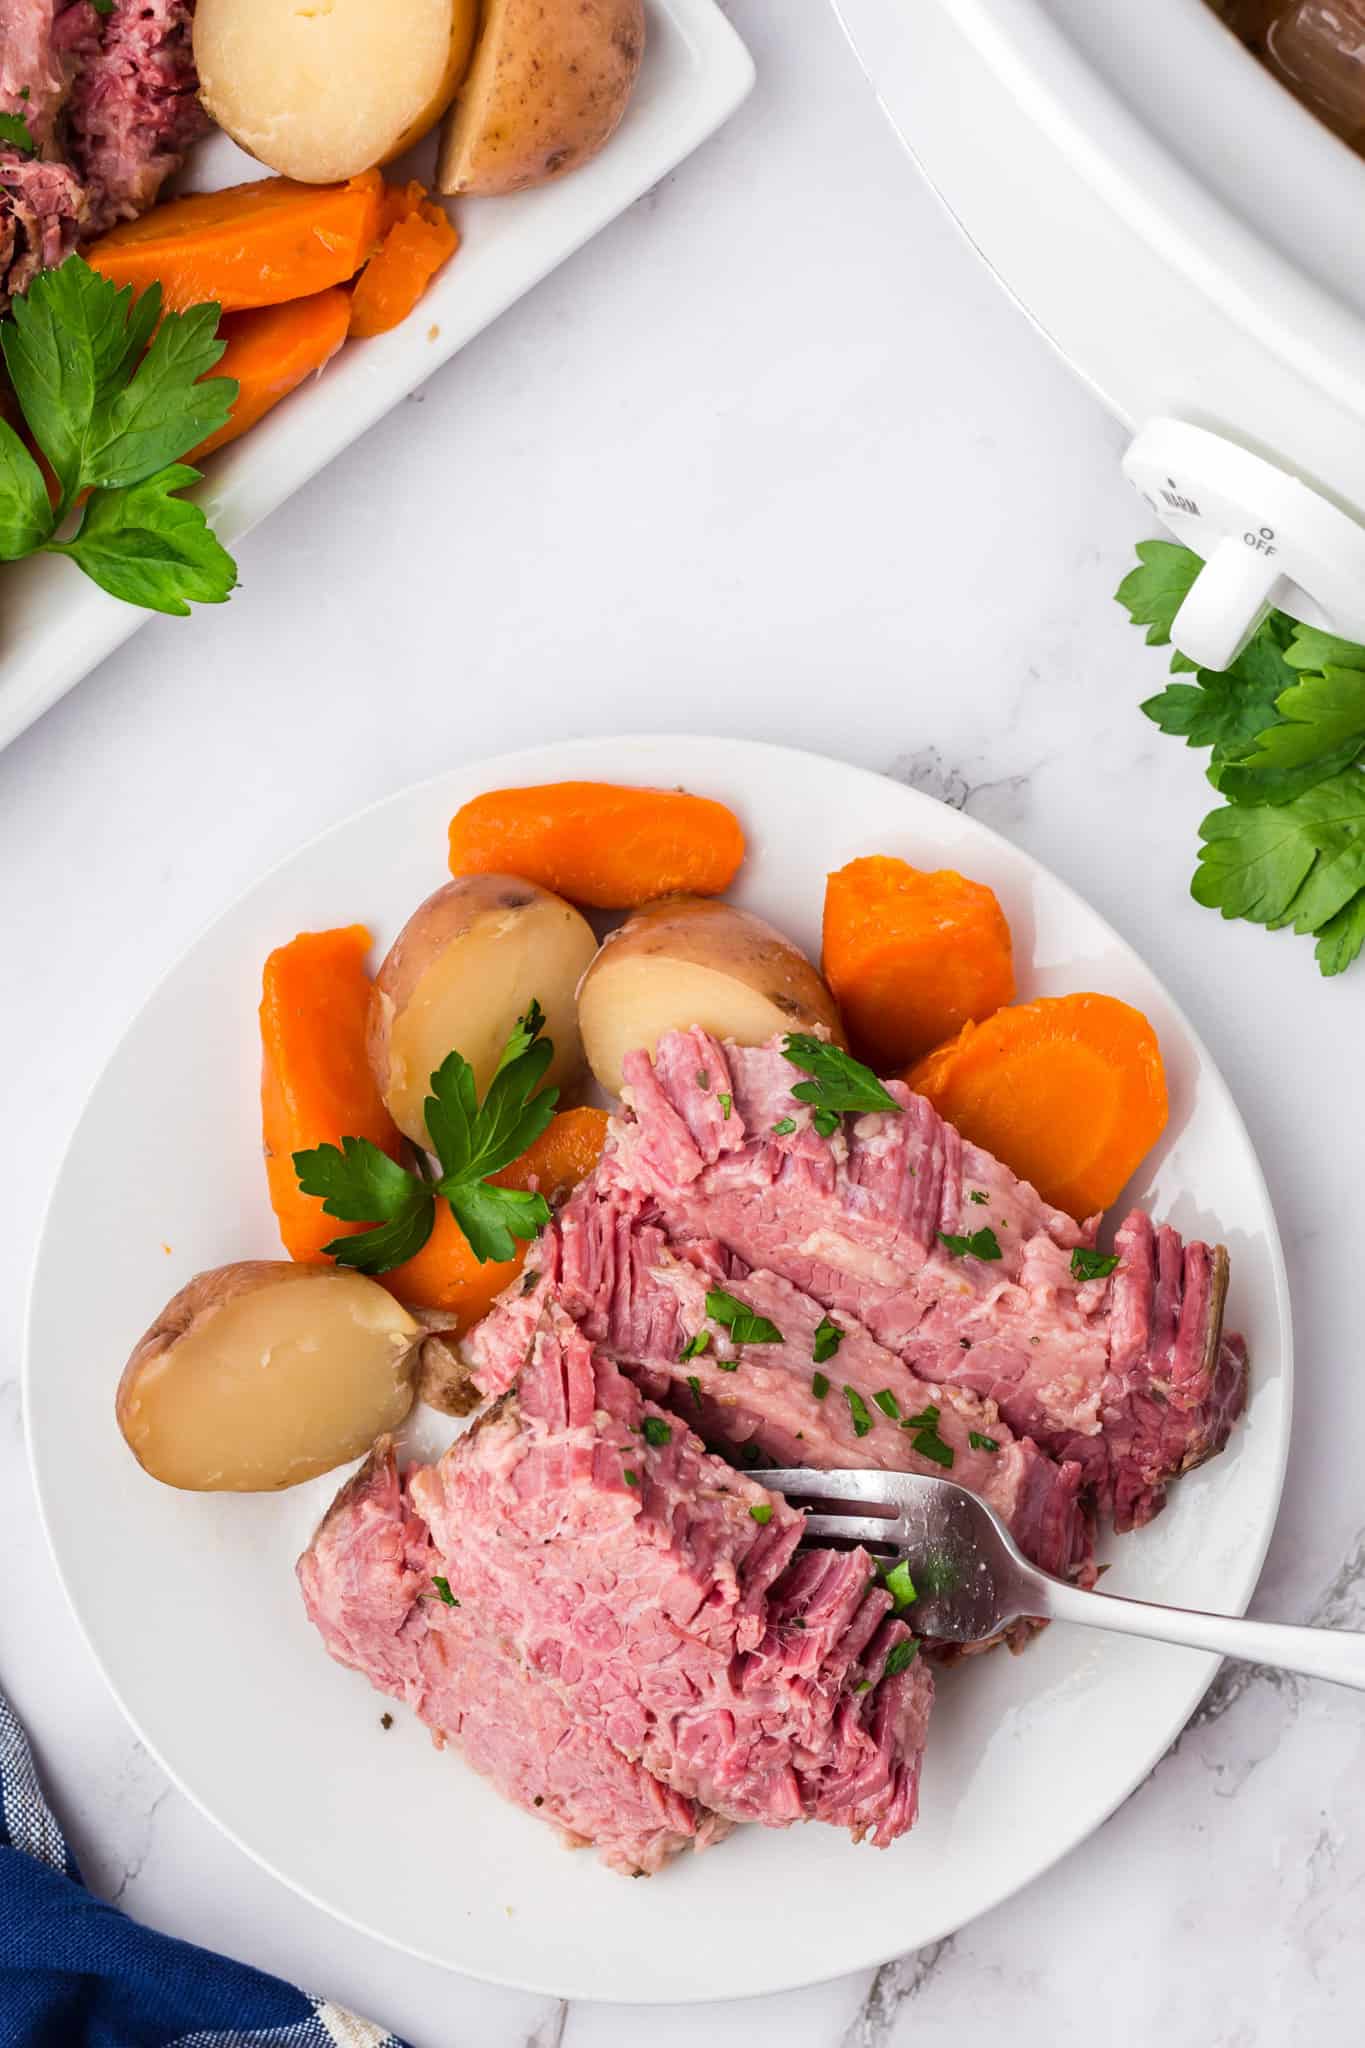 Crock Pot Corned Beef is a hearty slow cooker meal with the beef brisket, carrots and potatoes all cooked together.